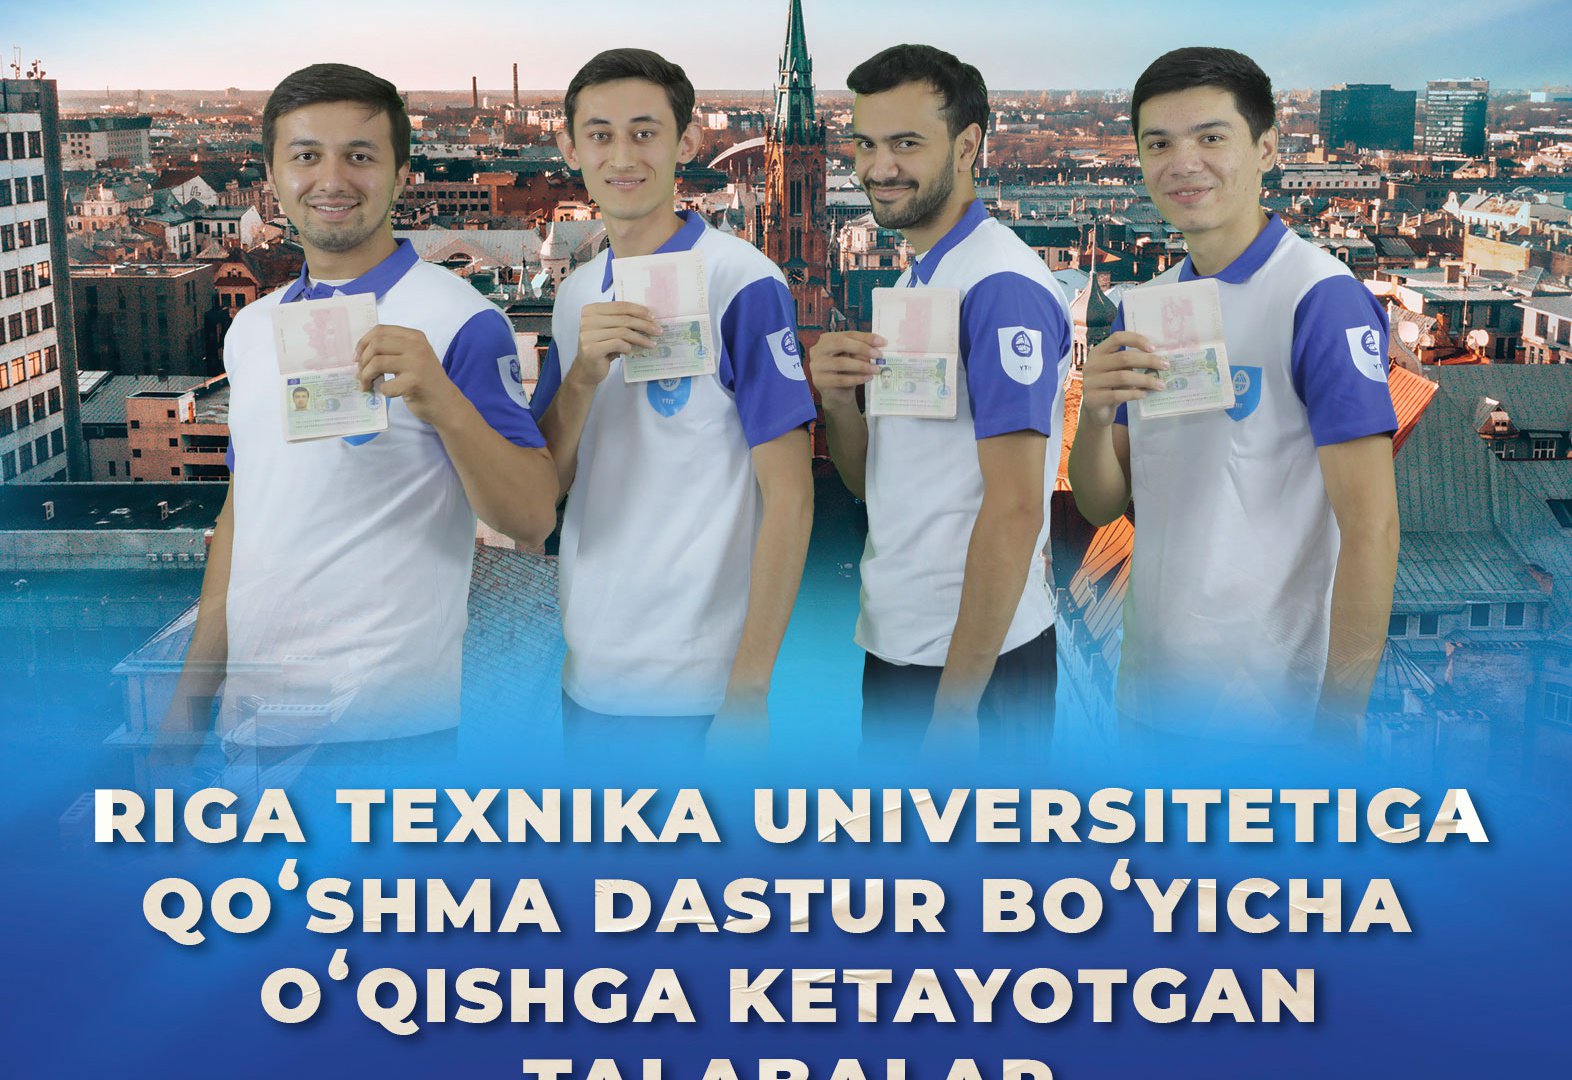 WITHIN THE FRAMEWORK OF THE INTERNATIONAL STUDENT MOBILITY PROGRAM OF THE YEOJU TECHNICAL INSTITUTE IN TASHKENT, 3RD YEAR STUDENTS OF THE BUSINESS MANAGEMENT FACULTY WILL CONTINUE THEIR STUDIES AT THE RIGA TECHNICAL UNIVERSITY OF LATVIA